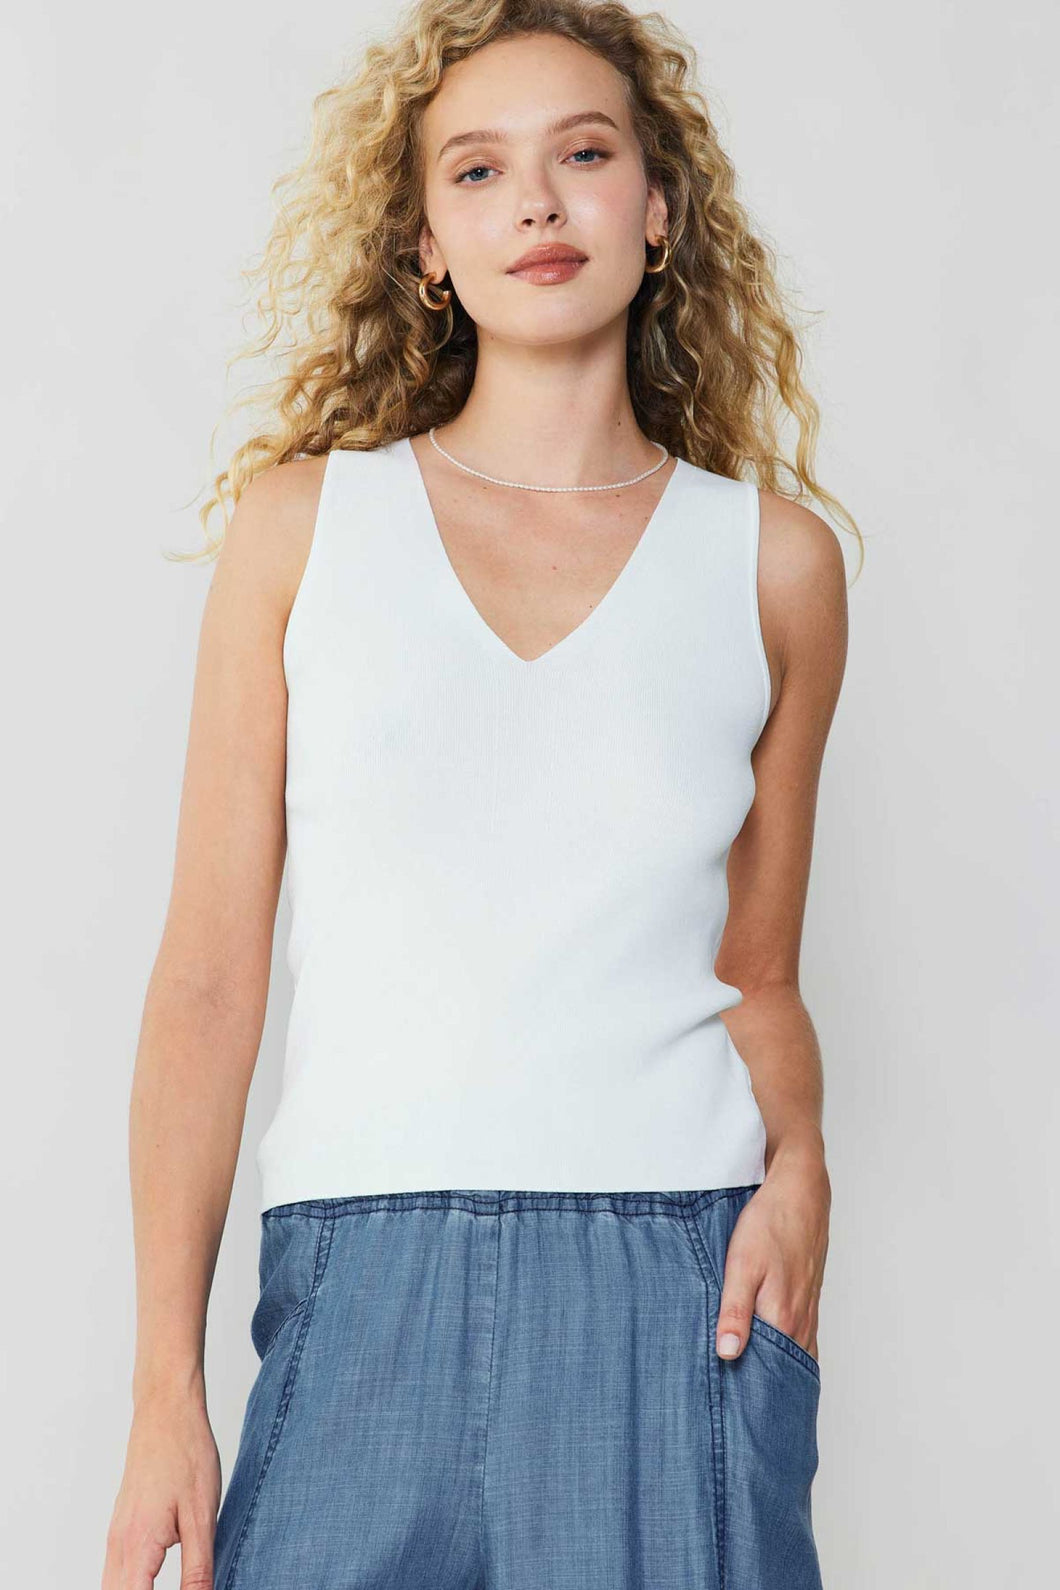 Capture style and luxury with Current Air's Sleeveless V-neck Sweater Top in crisp white. This exclusive piece features a sleeveless design and a V-neckline, elevating any outfit with elegance.